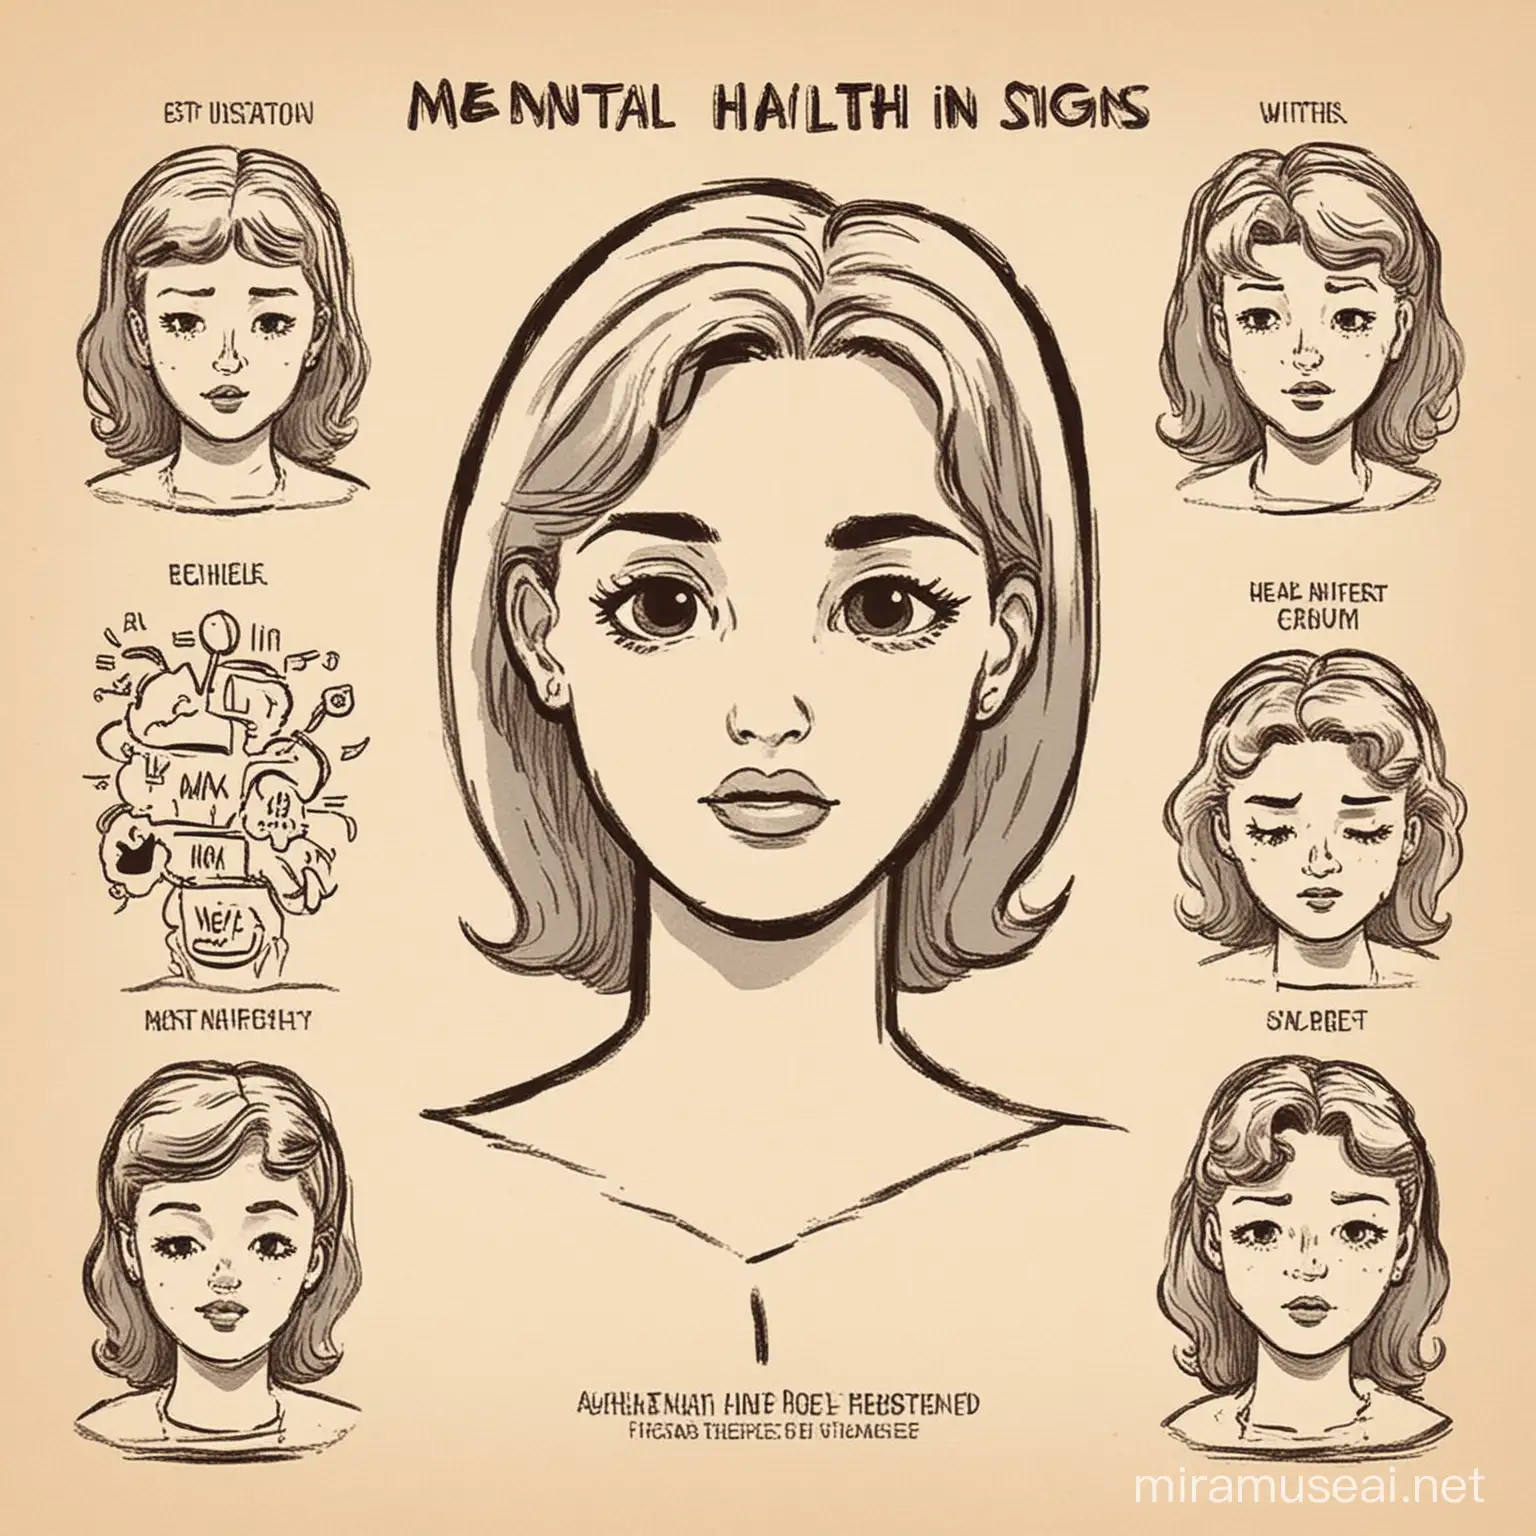 1950s Cartoon Style Depiction of Womens Mental Health Signs in Line Art